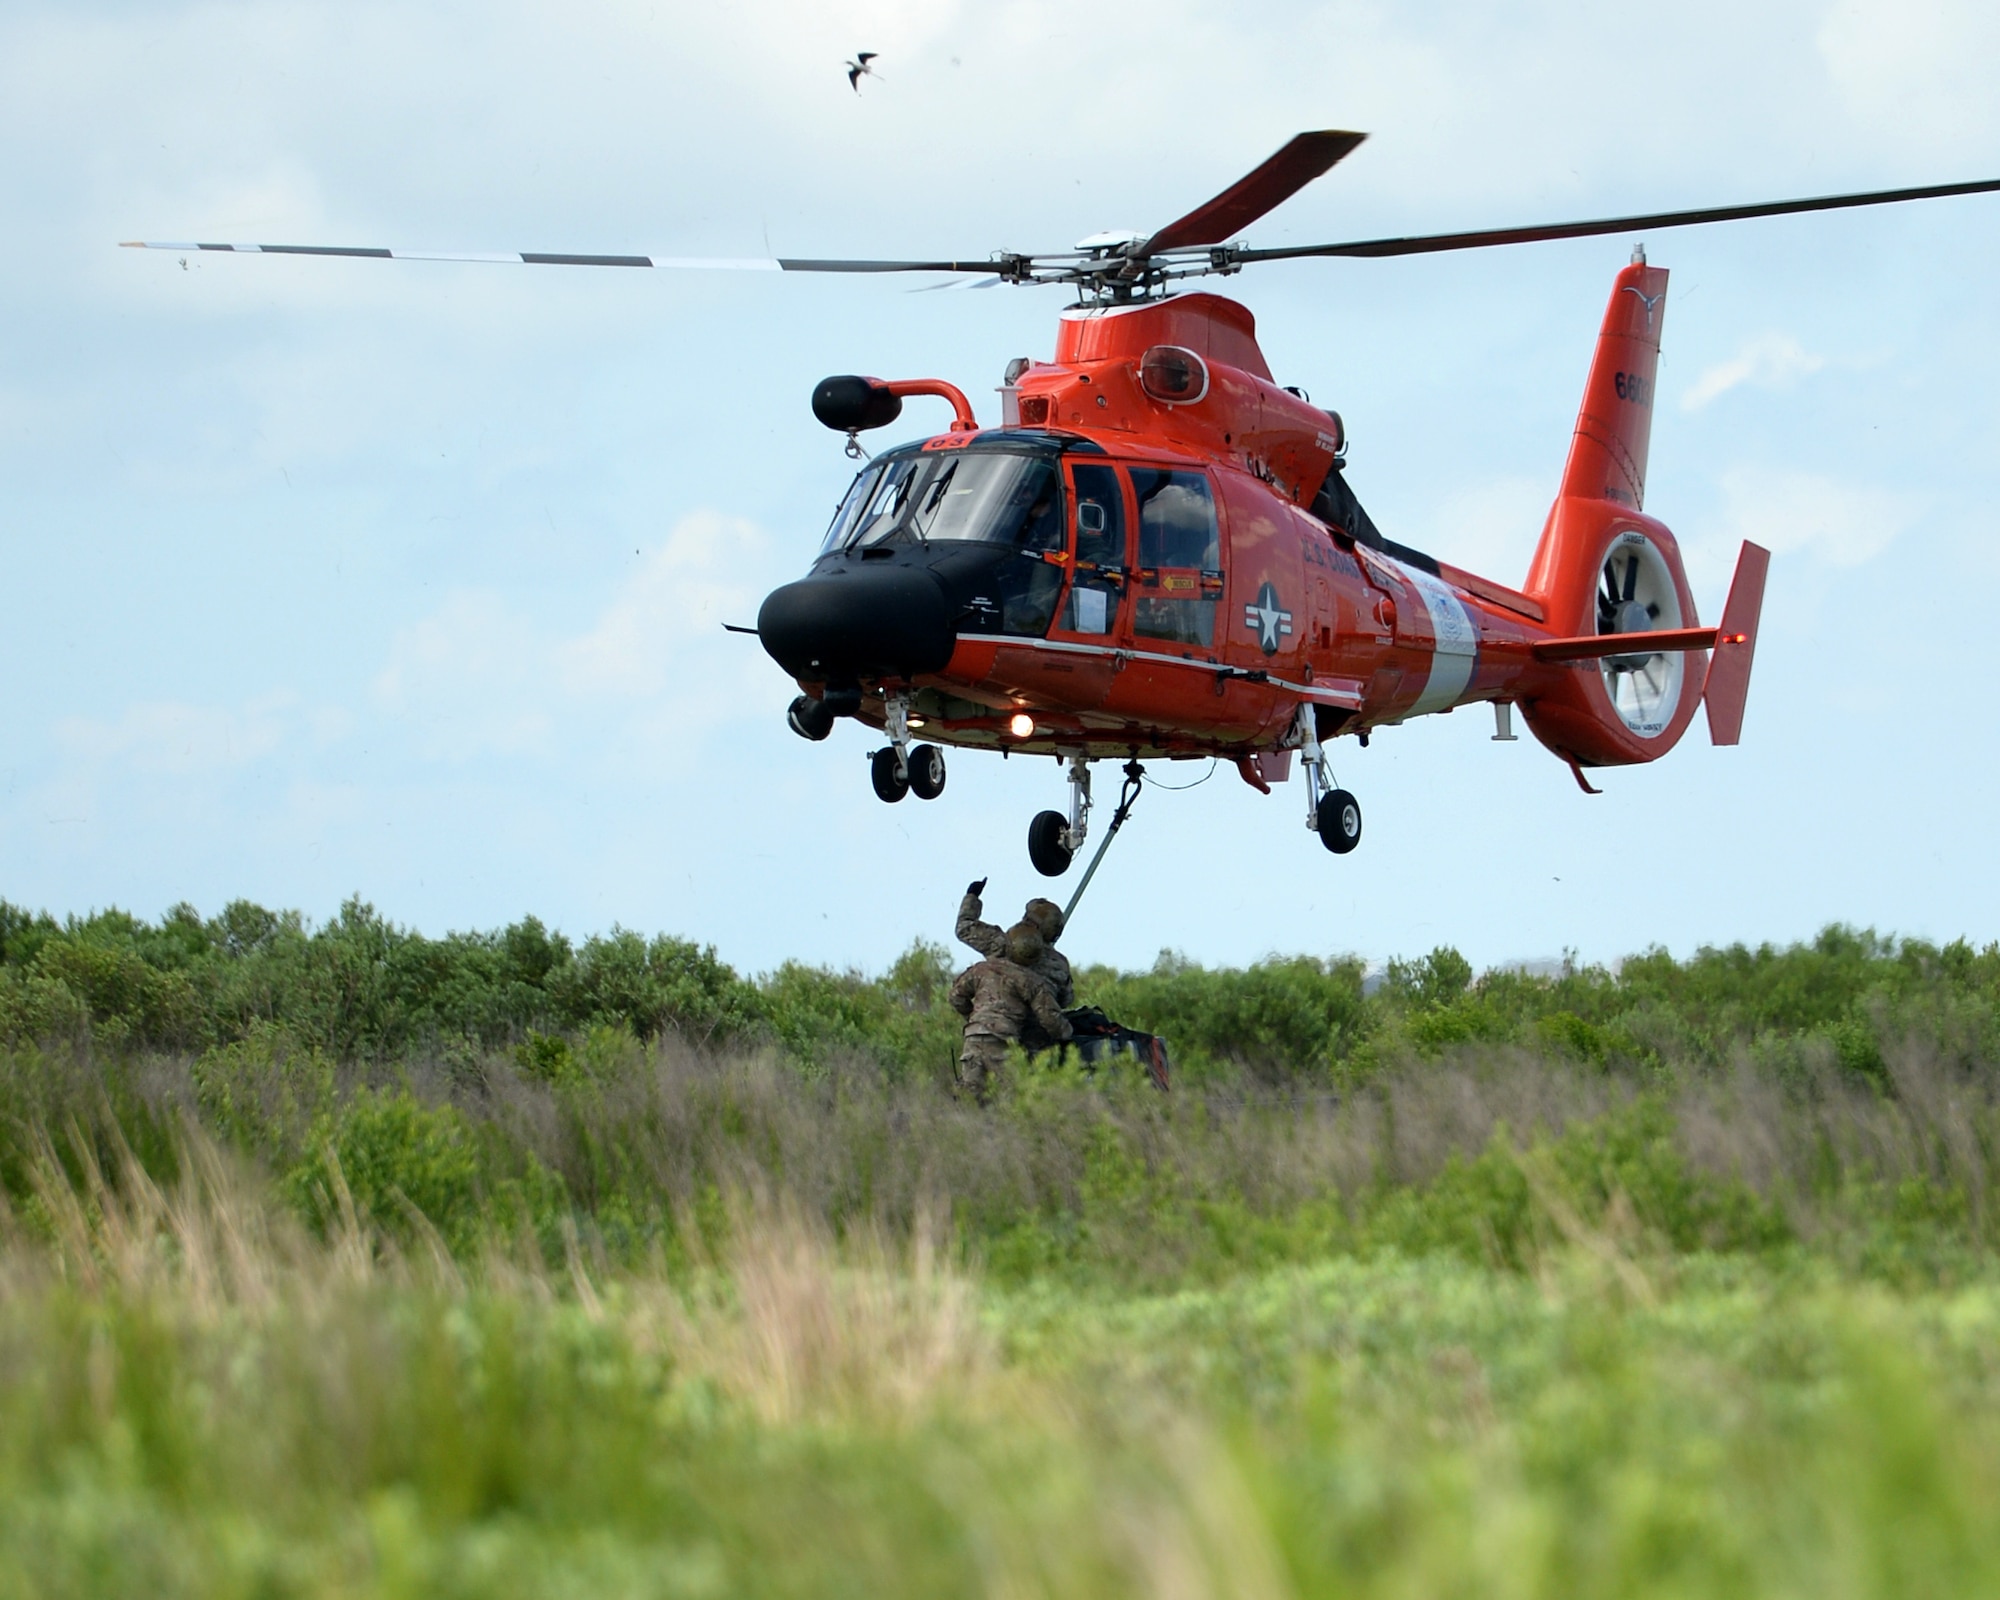 Tactical Air Control Party members with the 147th Air Support Operations Squadron; 147th Reconnaissance Wing, perform sling load operations with a U.S. Coast Guard MH-65 Dauphin during a domestic response resupply exercise June 7, 2014, at Galveston State Park. With the 2014 hurricane season underway, the training allowed the TACPs to exercise response efforts with the Coast Guard members, performing helicopter landing zone operations, aerial resupply and sling load operations.